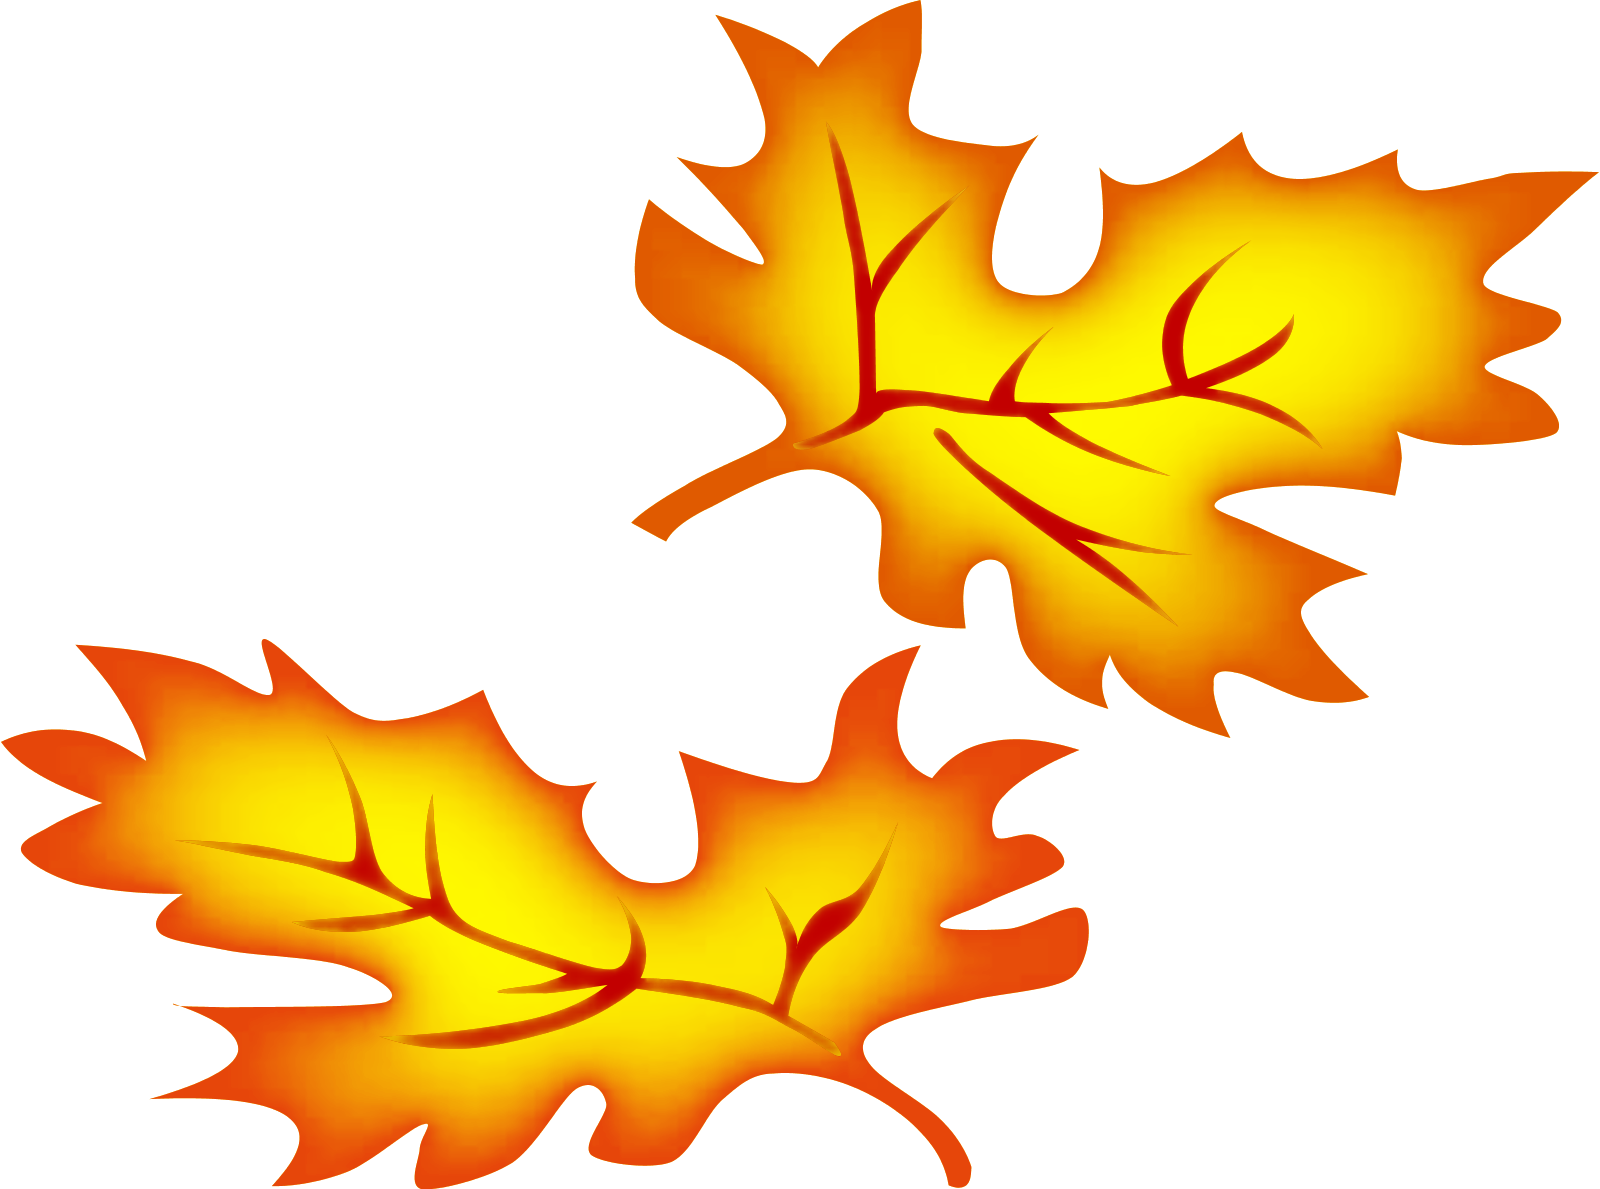 Fall Leaves Border Clipart | Clipart Panda - Free Clipart Images